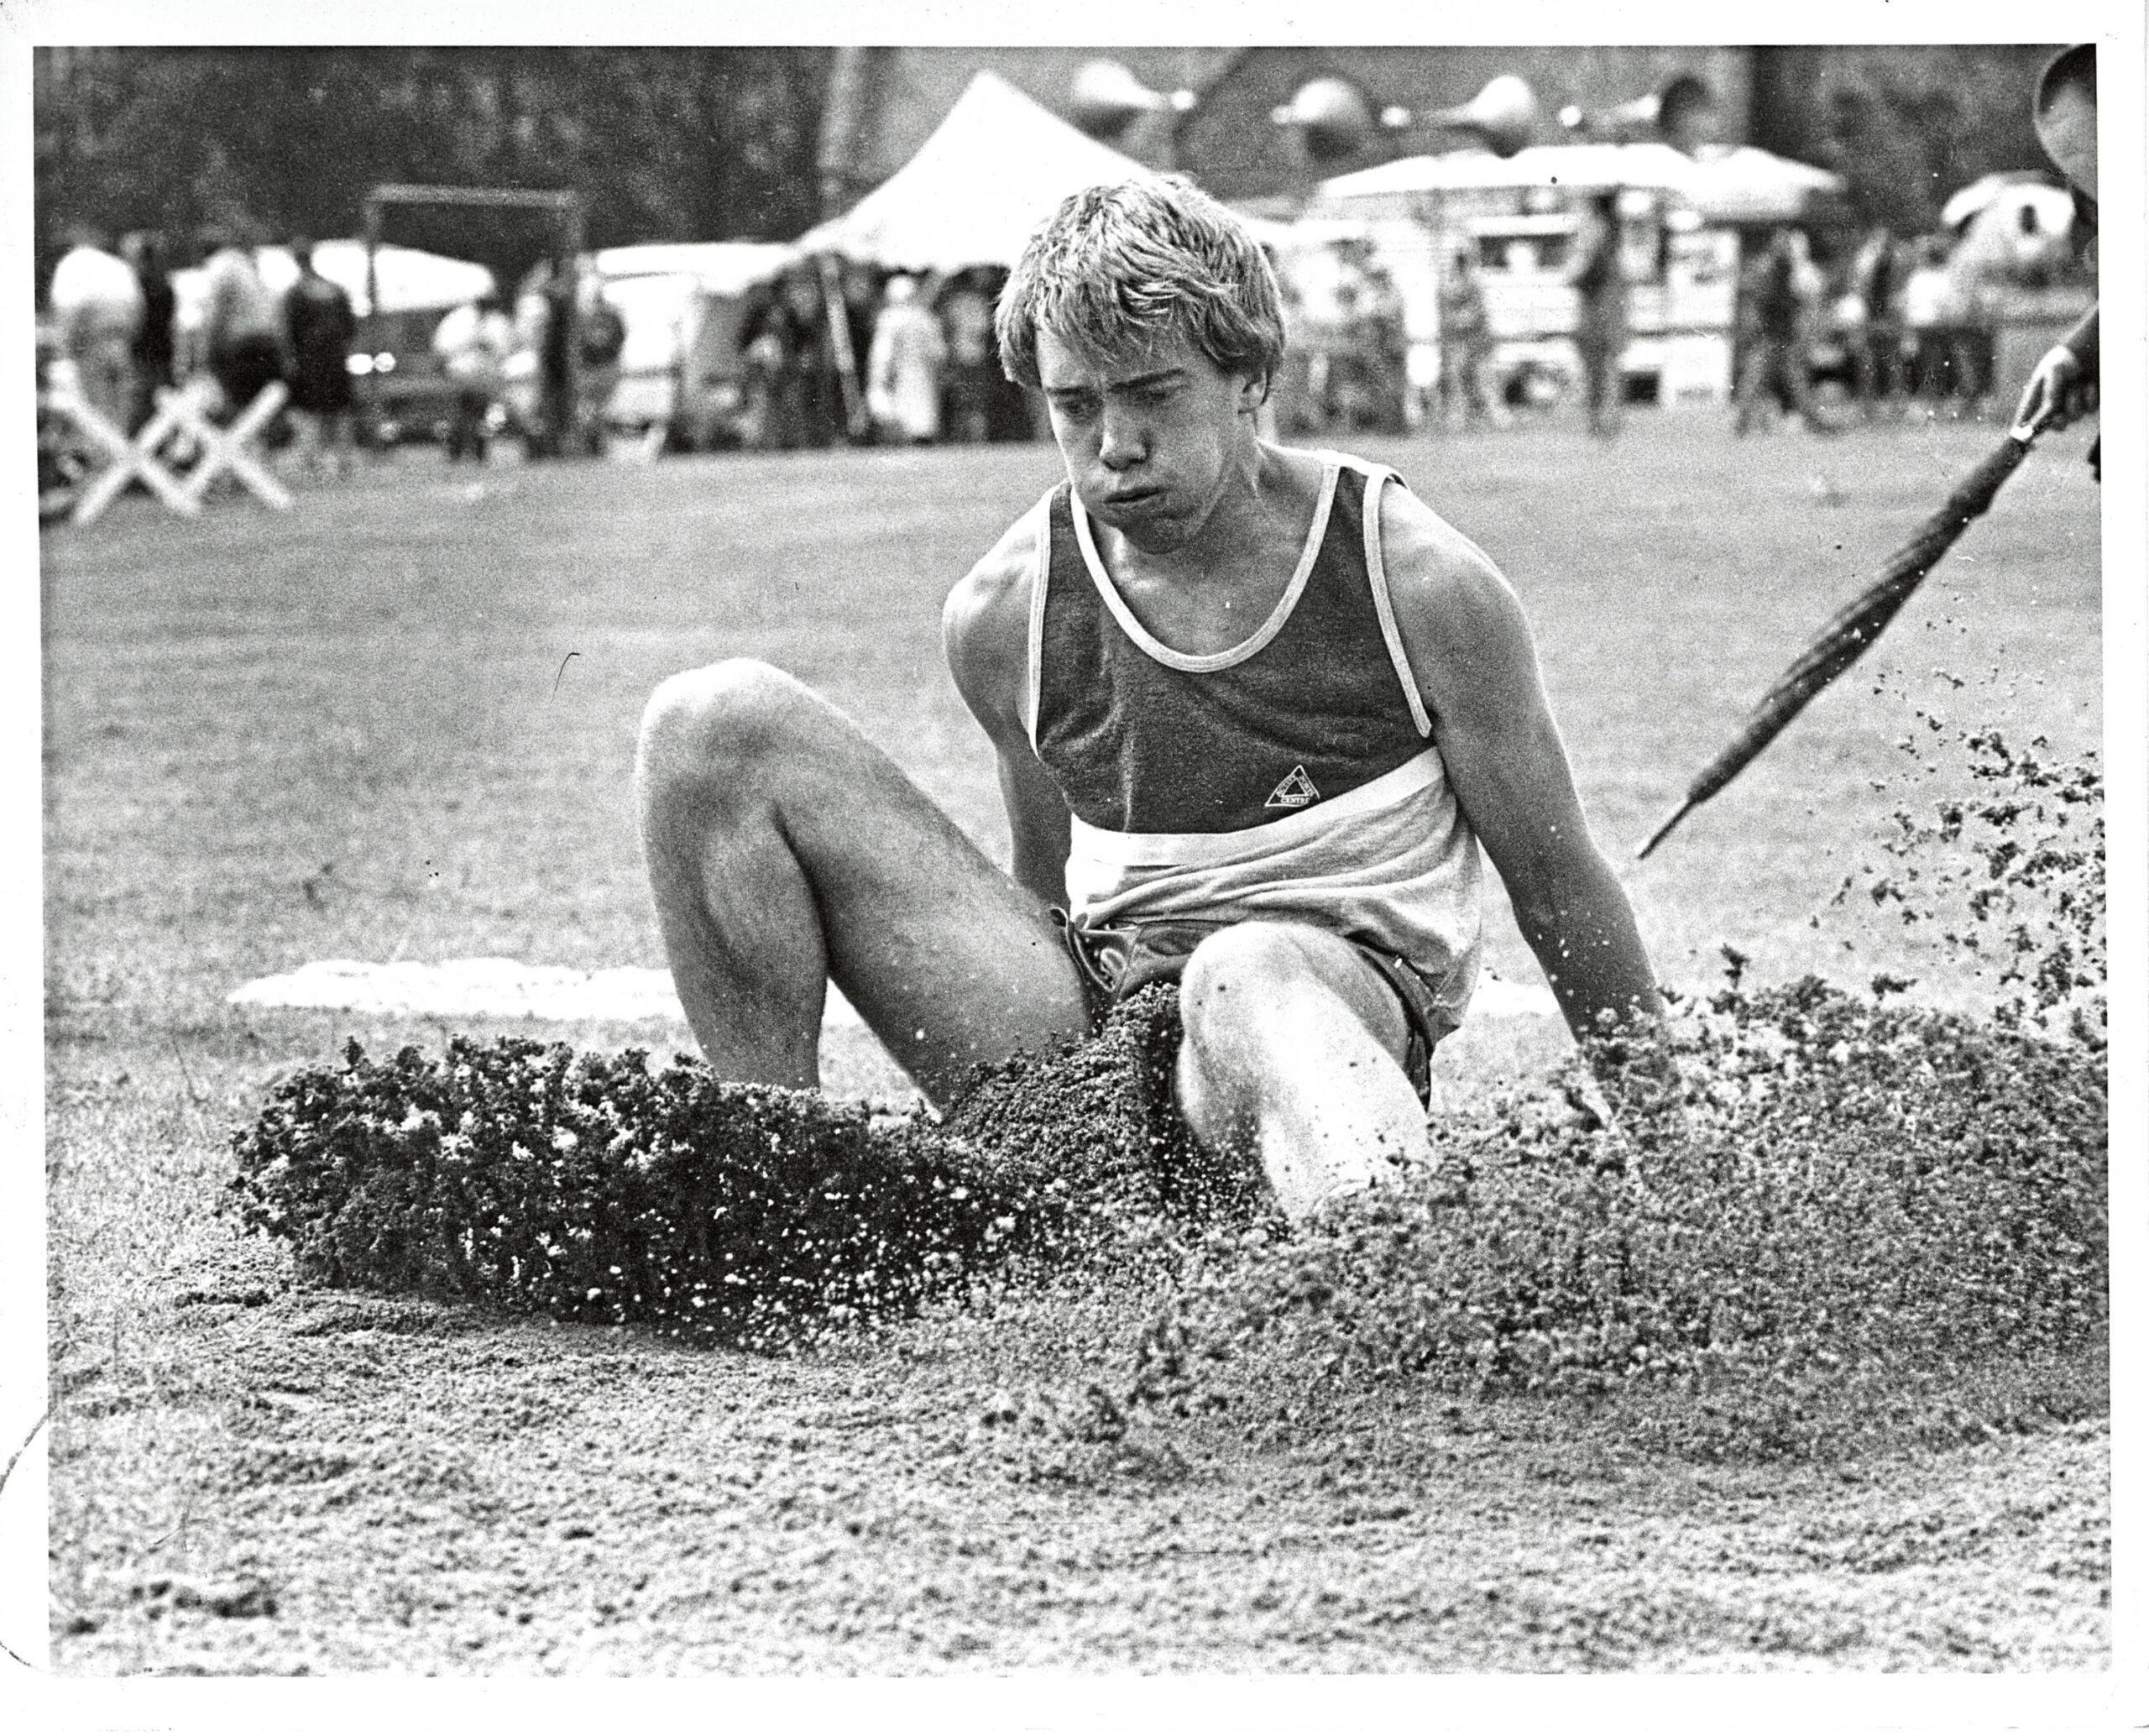 Stephen Thomas, from Torphins, making a big splash in the long leap sand pit in 1988.